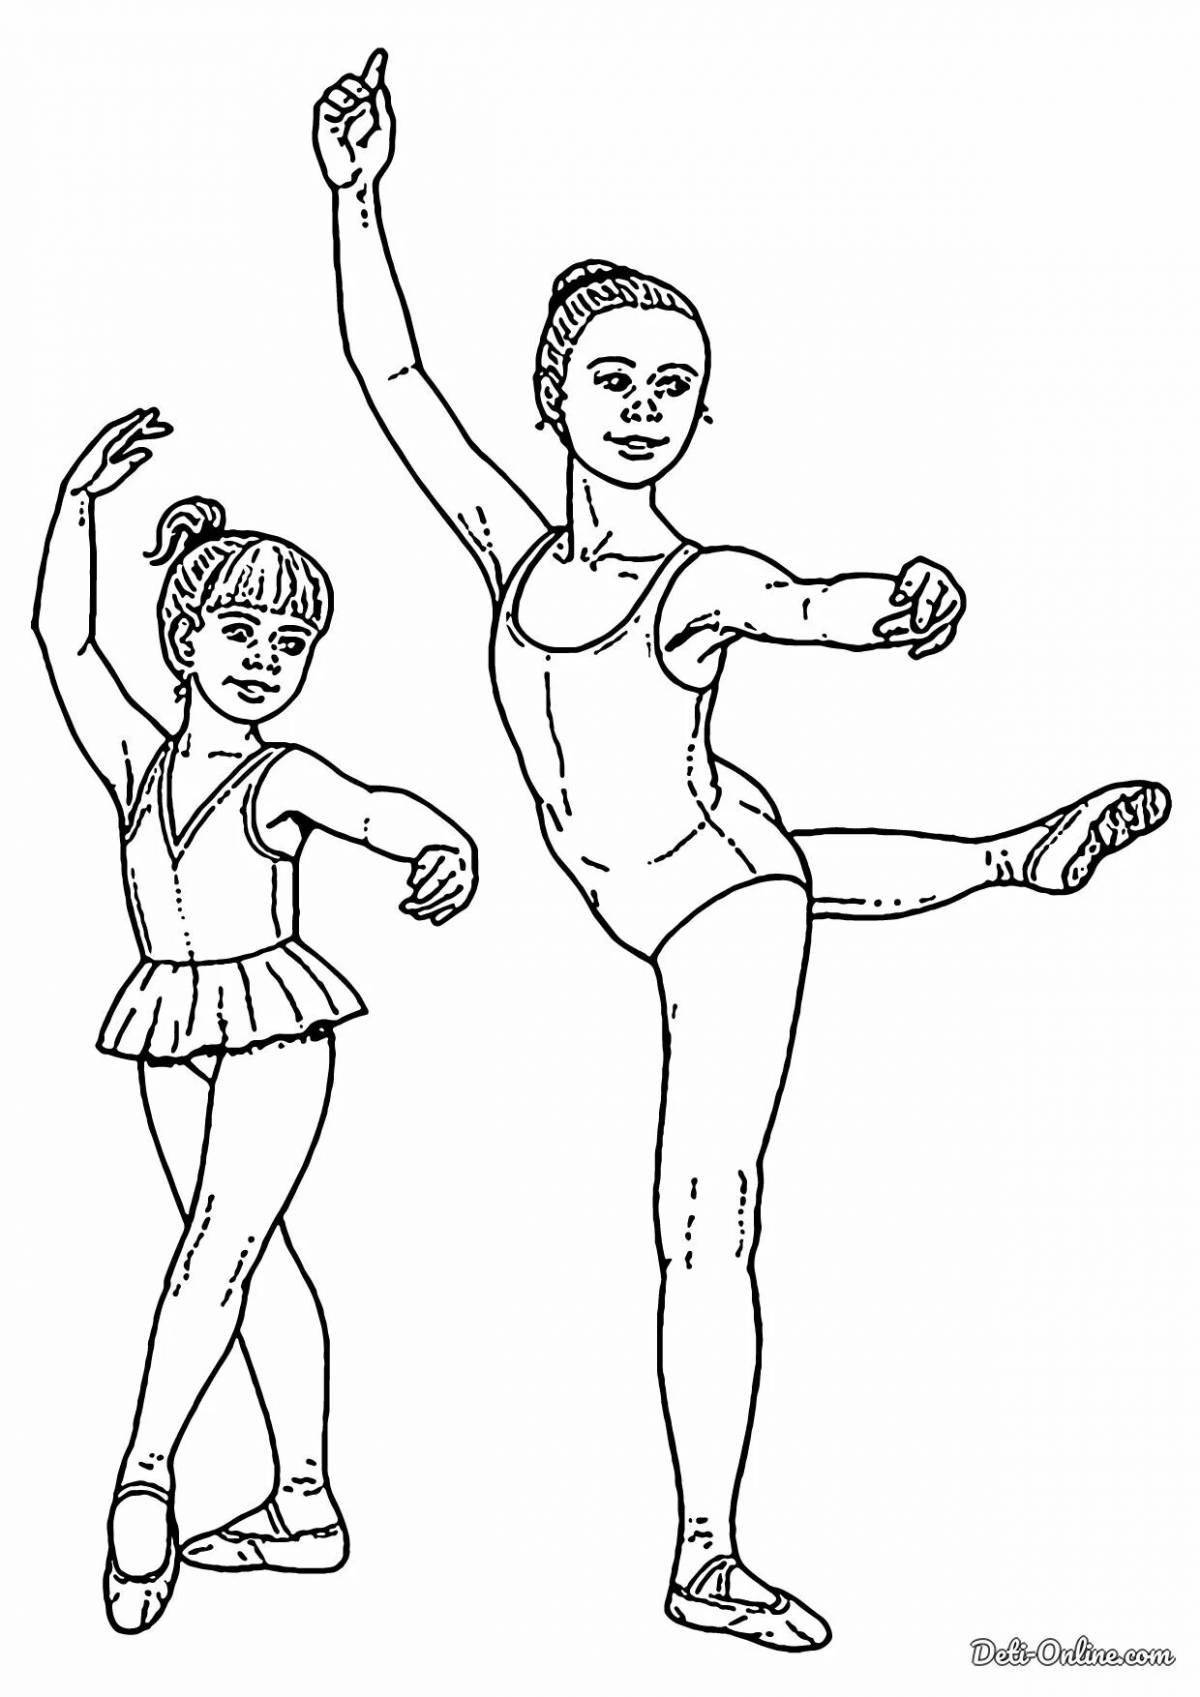 Energetic gymnast coloring pages for kids